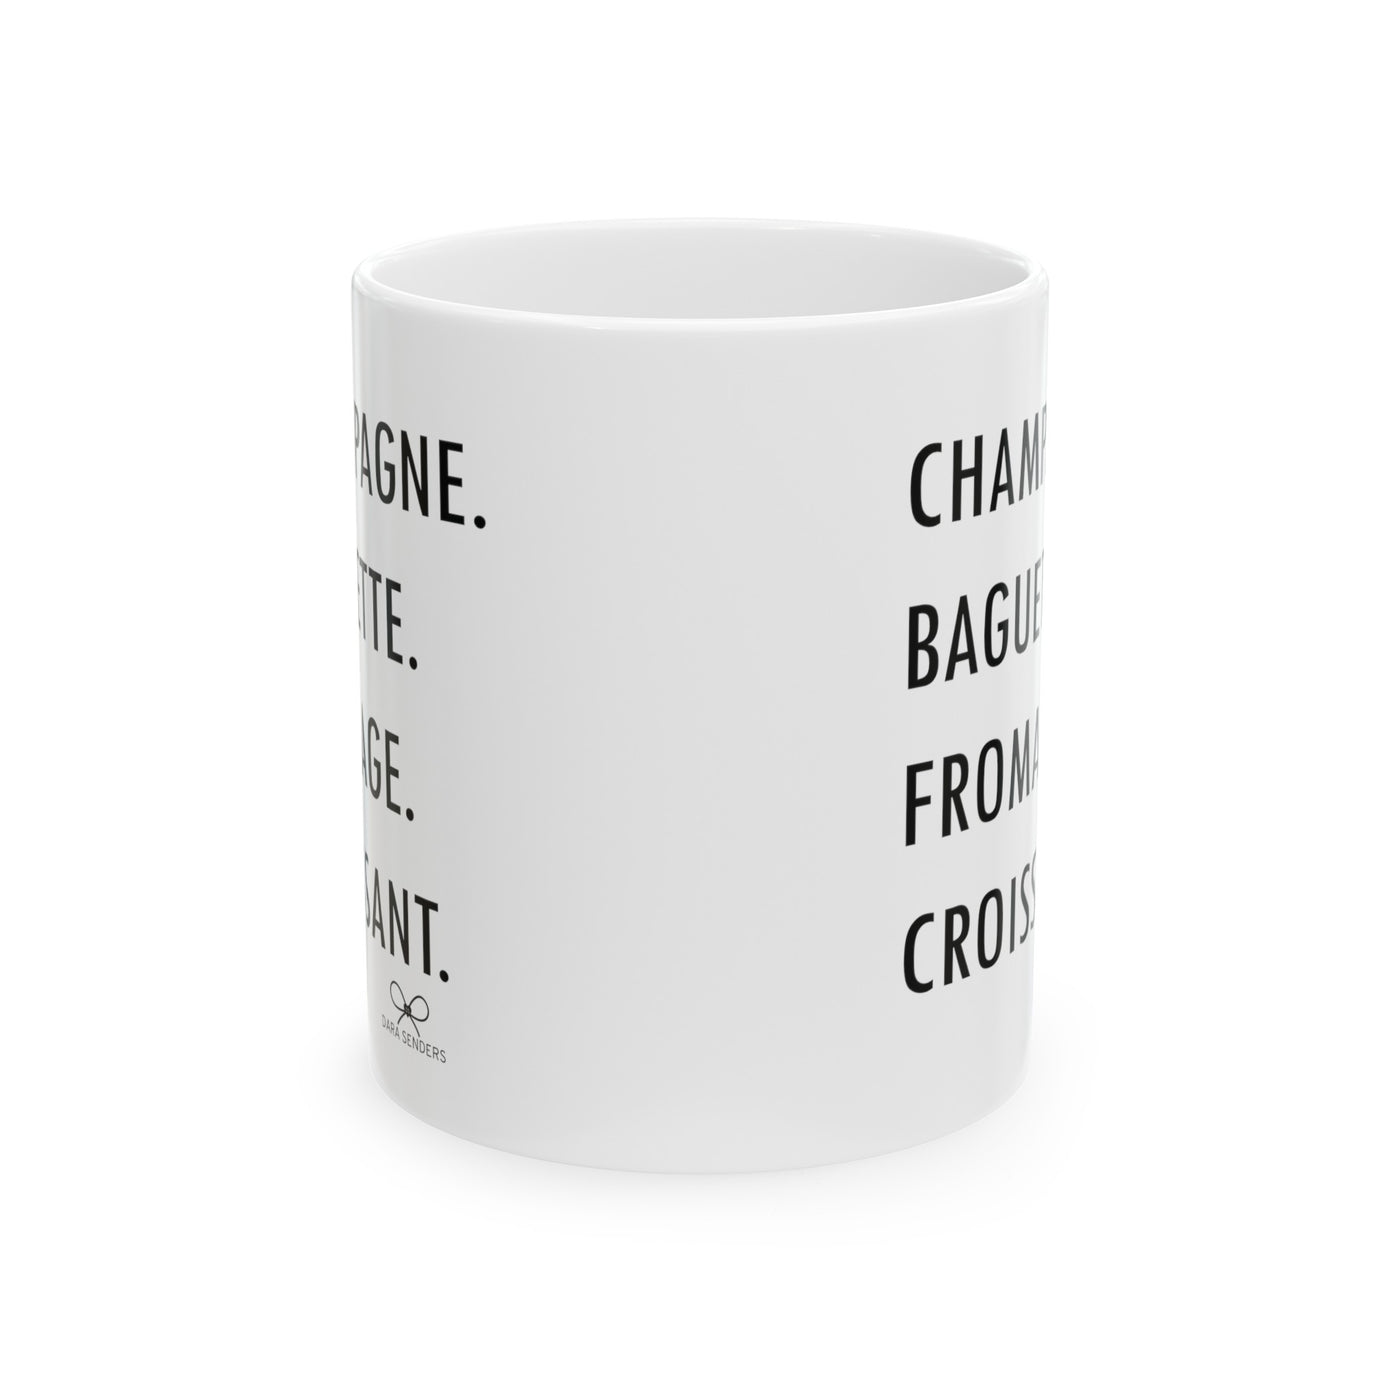 GOURMET LOVE (Champagne, Baguette, Fromage, Croissant) MUG - NEWS 12 EXCLUSIVE